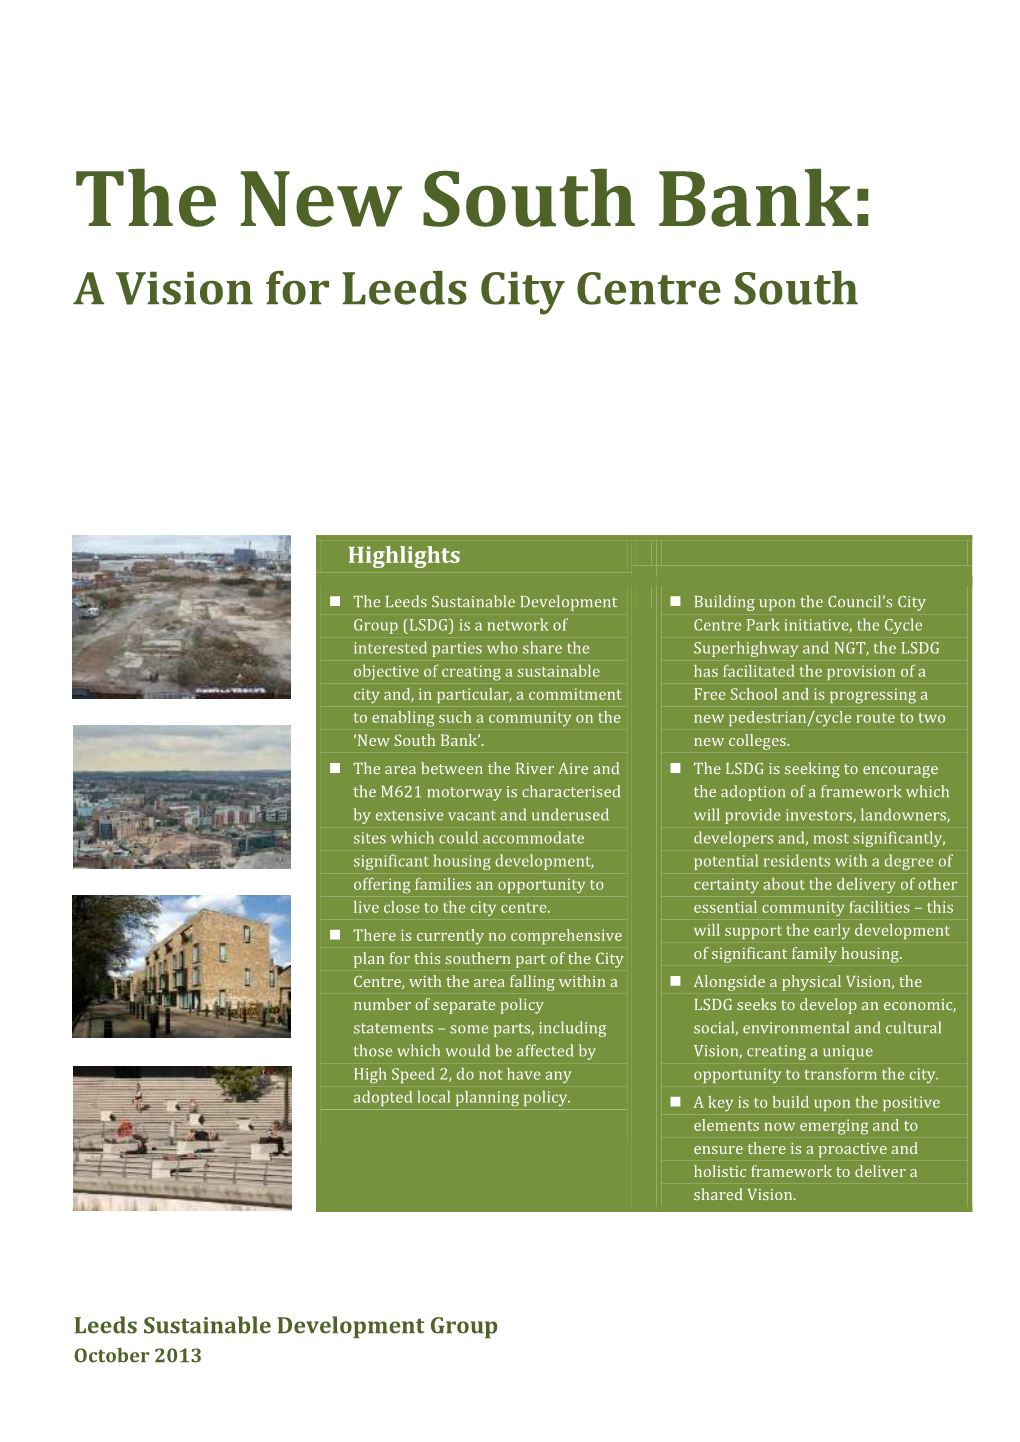 The New South Bank: a Vision for Leeds City Centre South